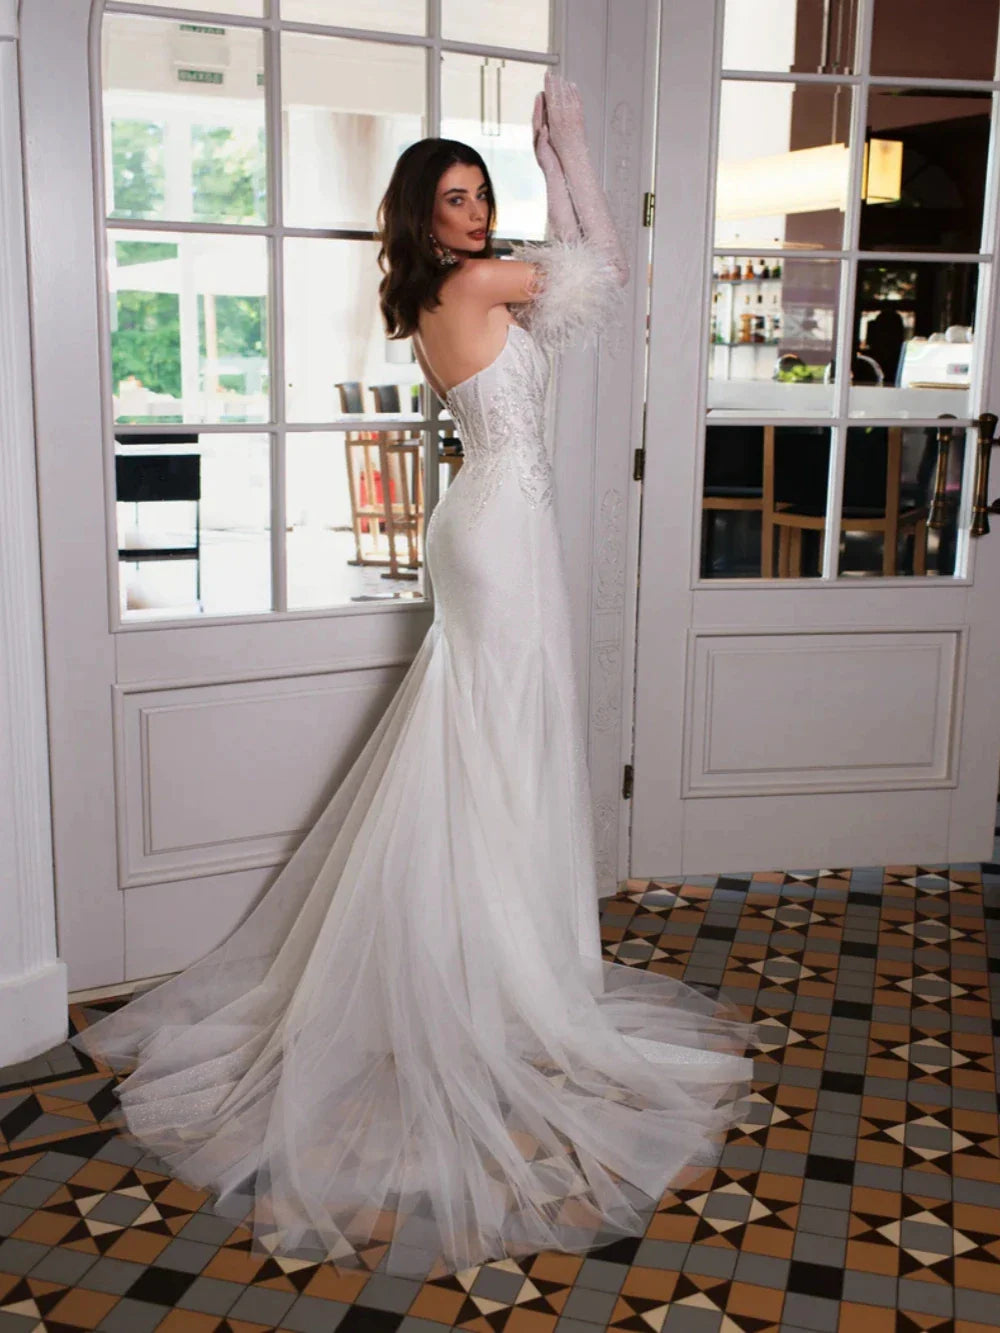 Sexy Strapless Backless Wedding Dress Sparkly Sequins Bride Robe Graceful Tulle Feathers Long Bridal Gown Robe De Mariée